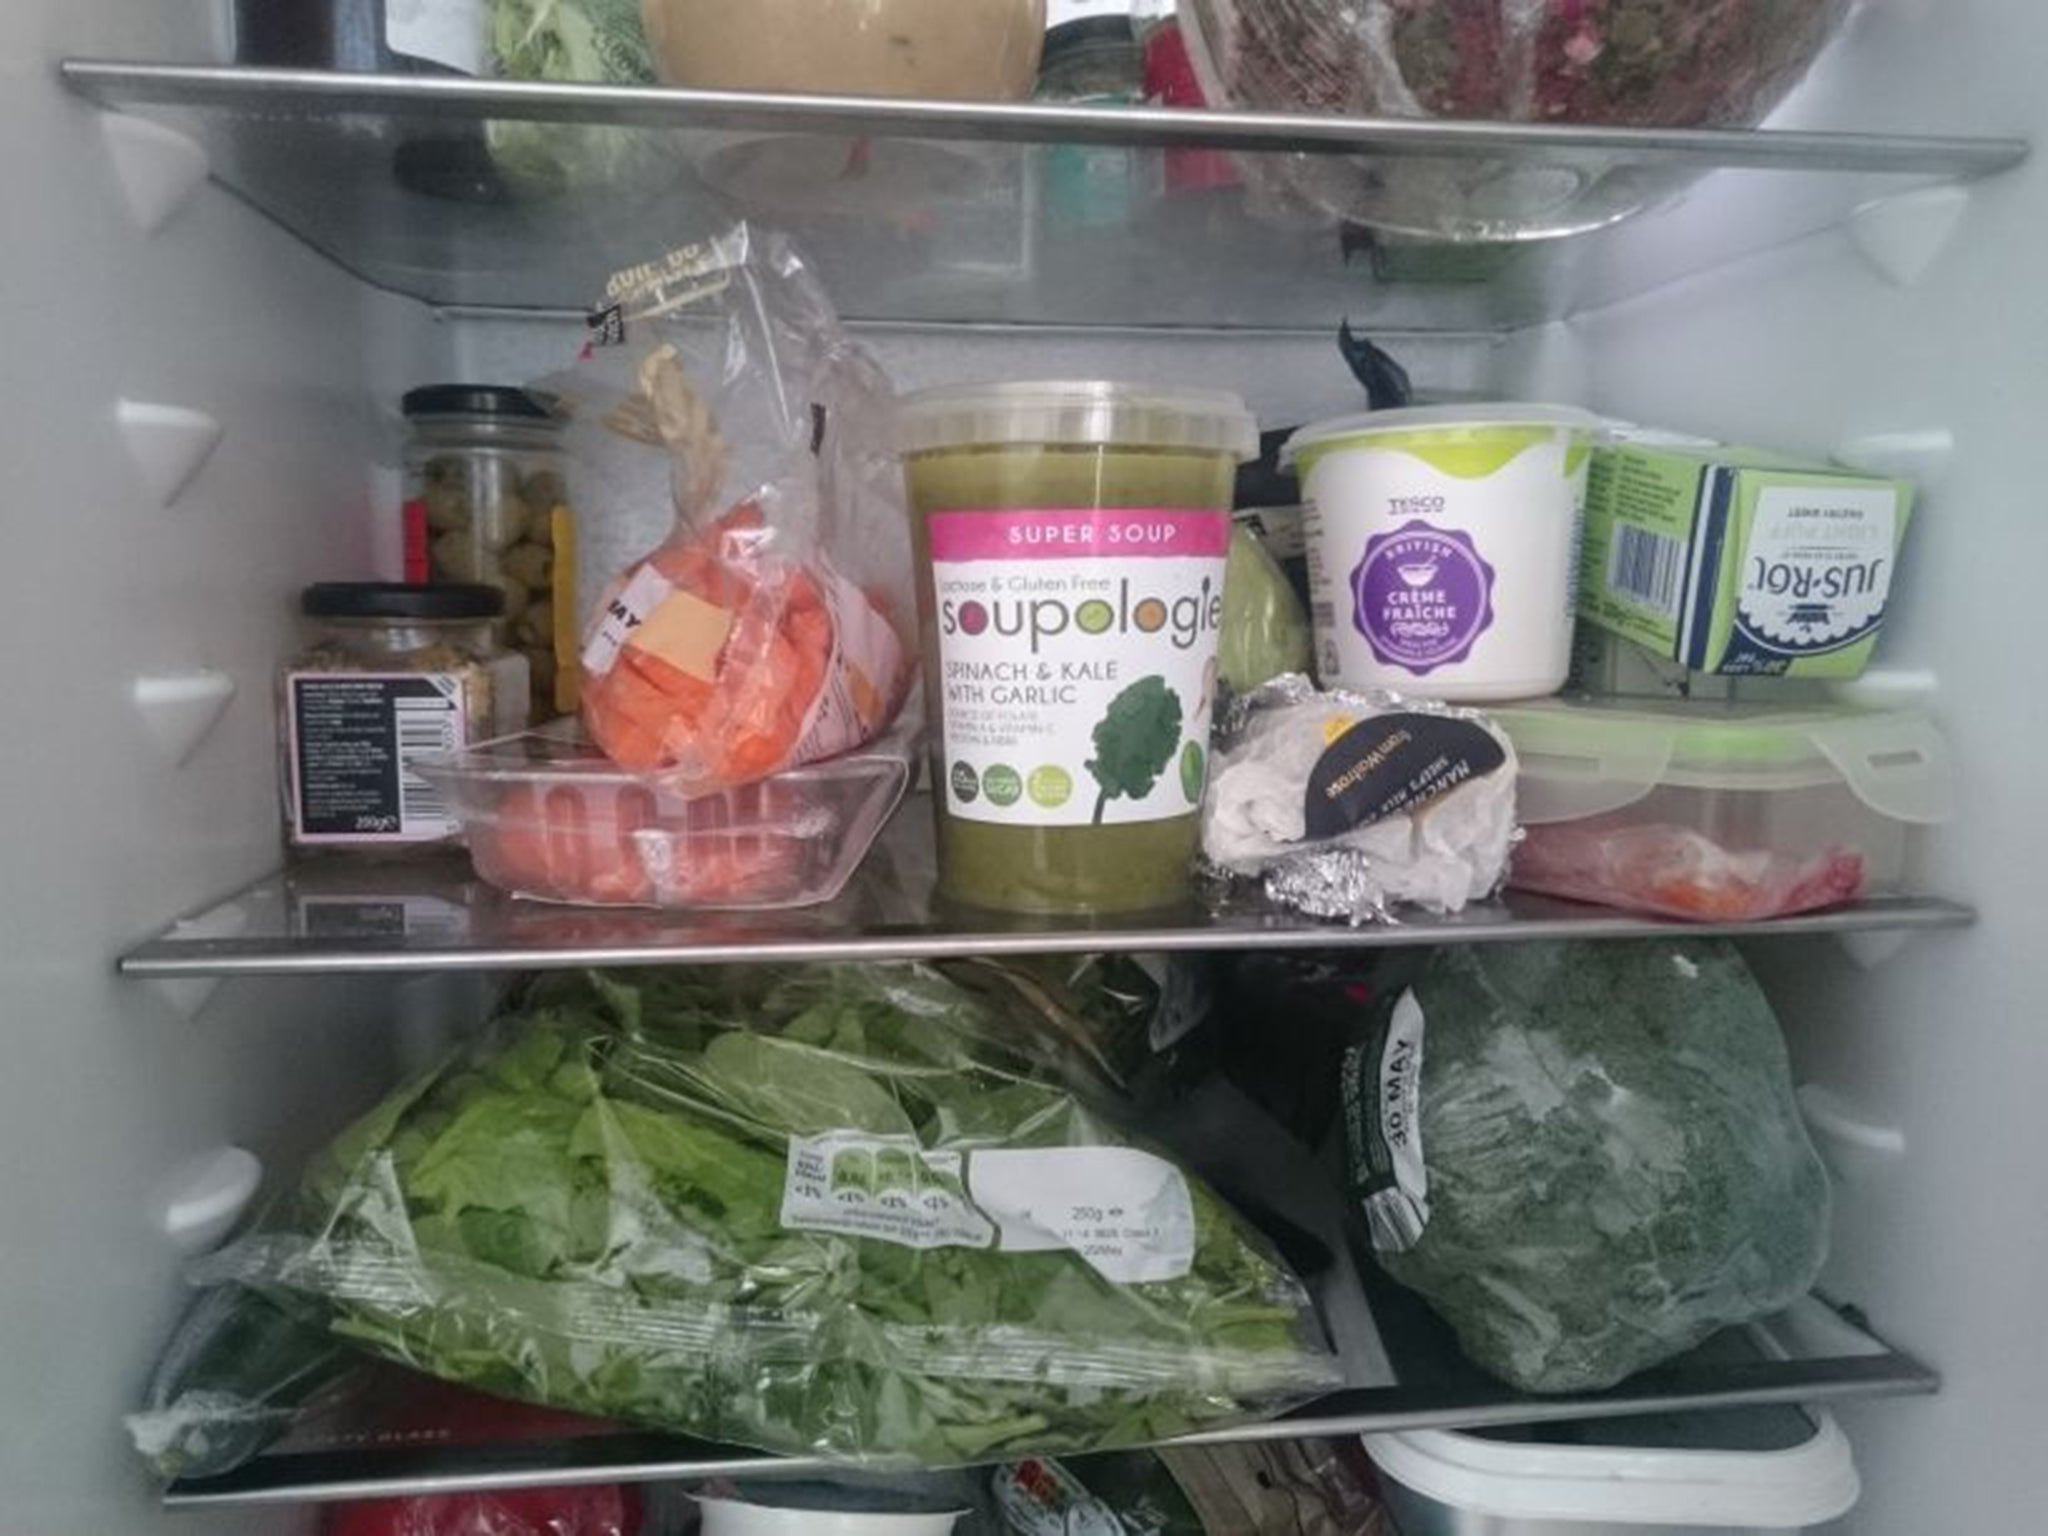 Samuel Muston’s fridge, which shows that he’s busy, health-conscious – and looks good naked, according to an expert assessment